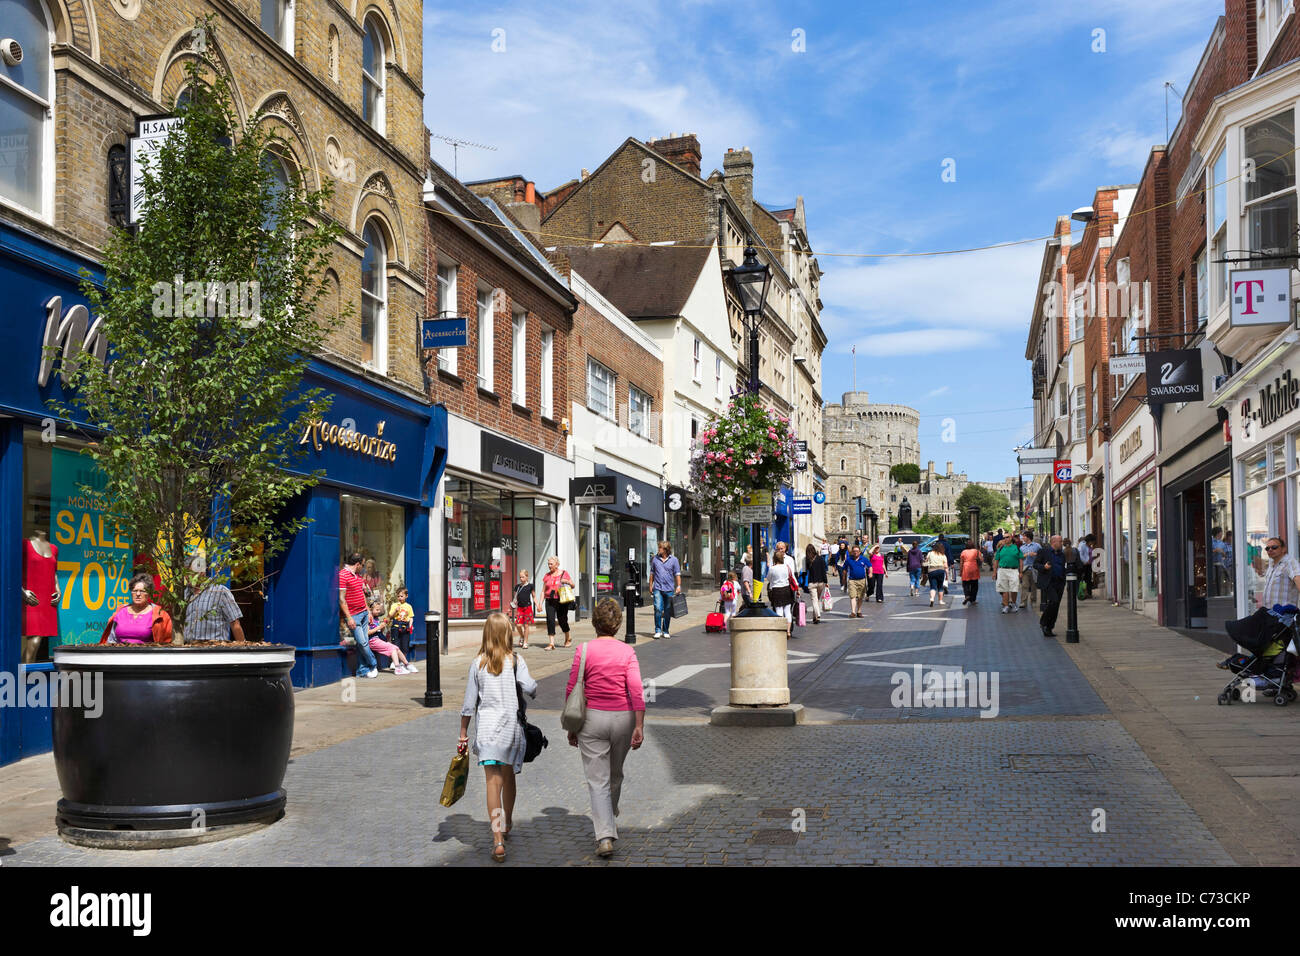 Shops on Peascod Street in the town centre with Windsor Castle in the distance, Windsor, Berkshire, England, UK Stock Photo